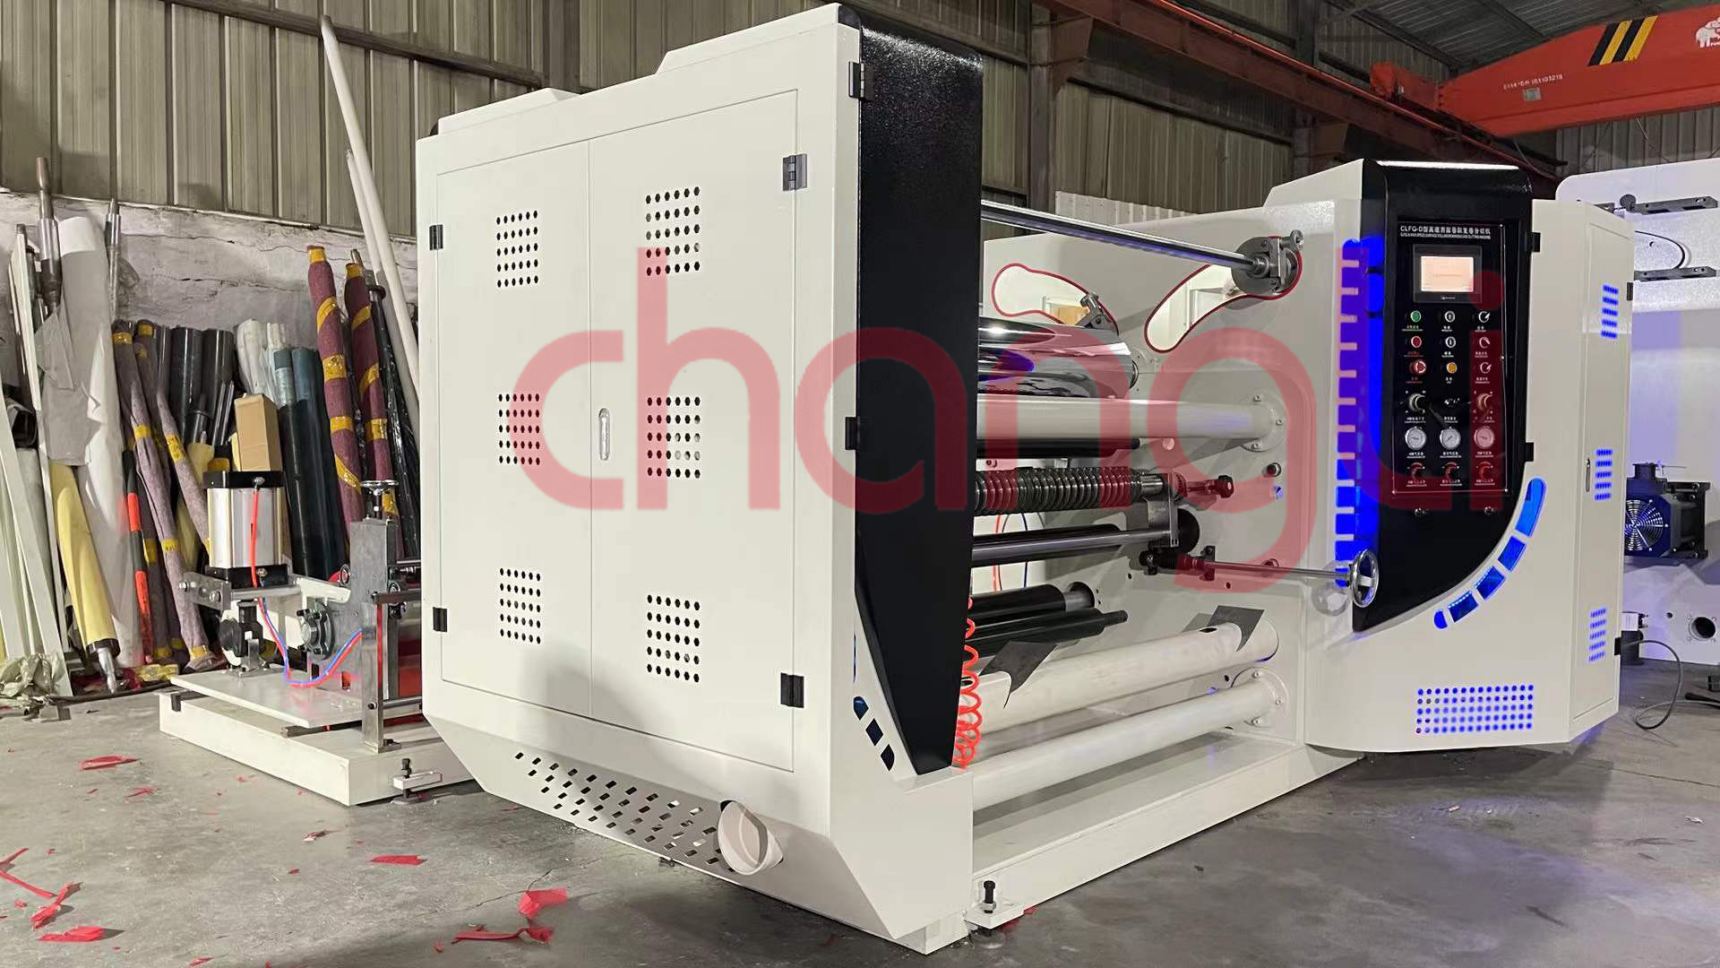 Full Automatic used paper slitter rewinder machine for sale